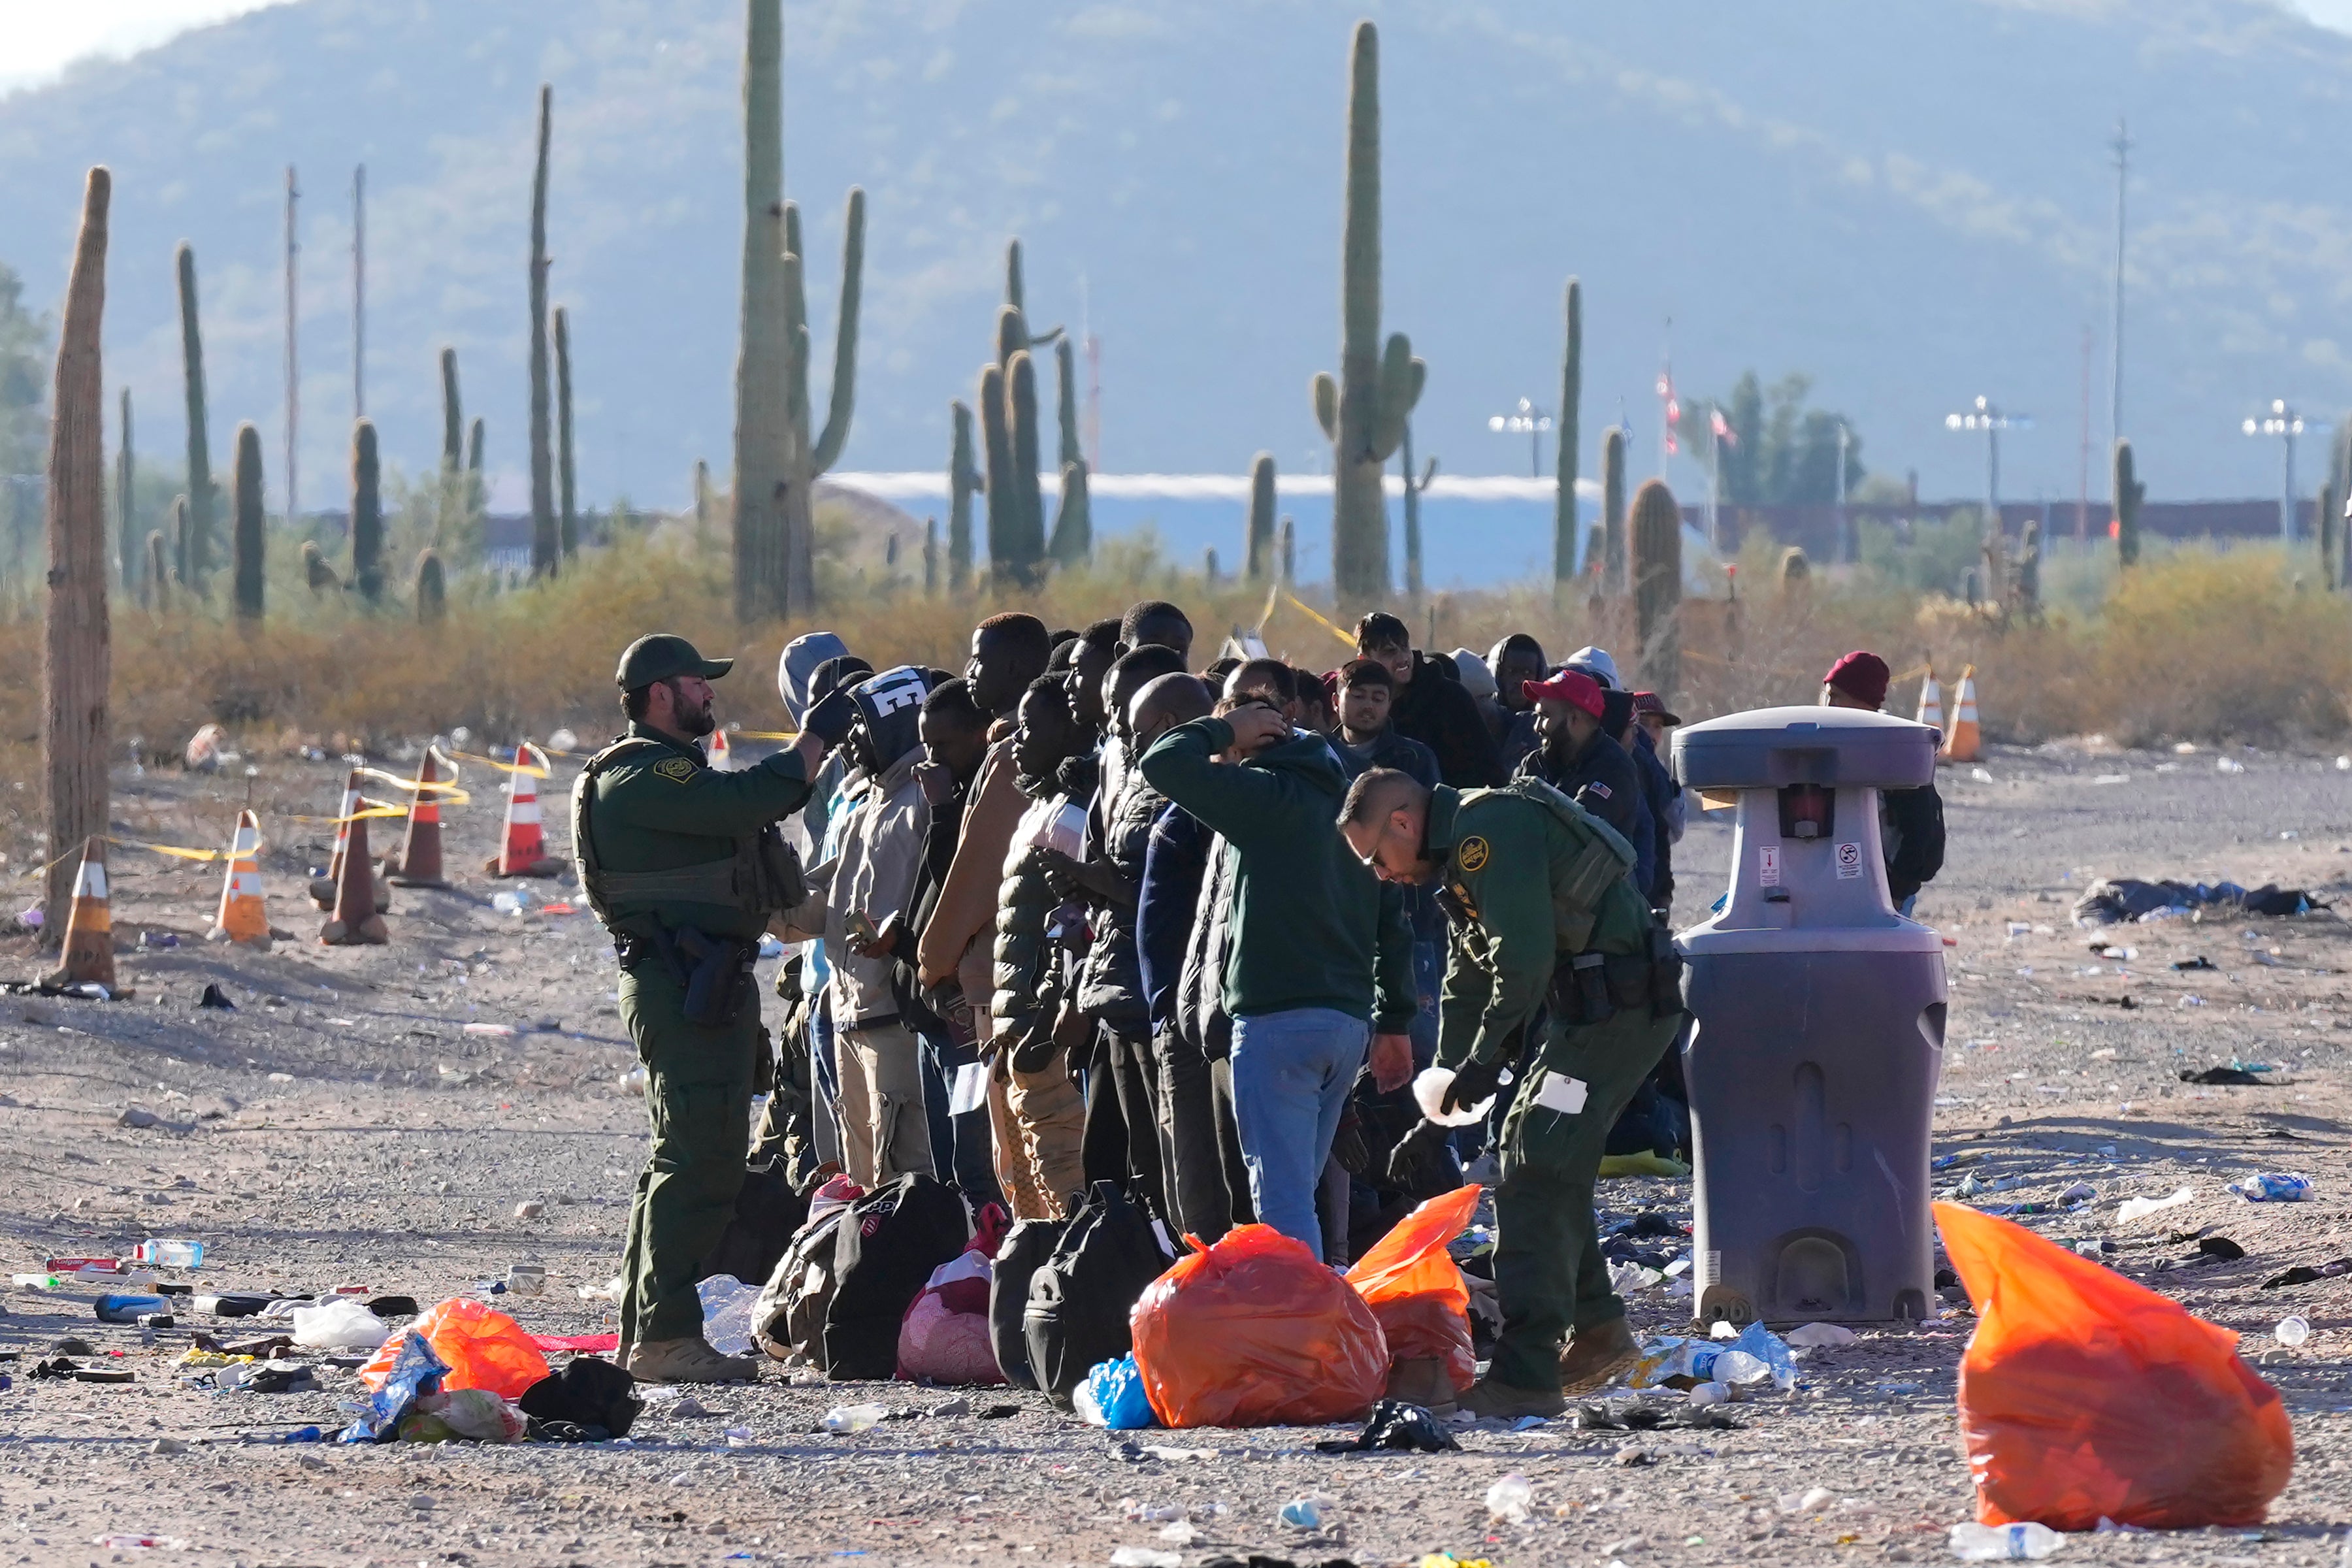 US Border Patrol officers with a group of migrants near the southern border